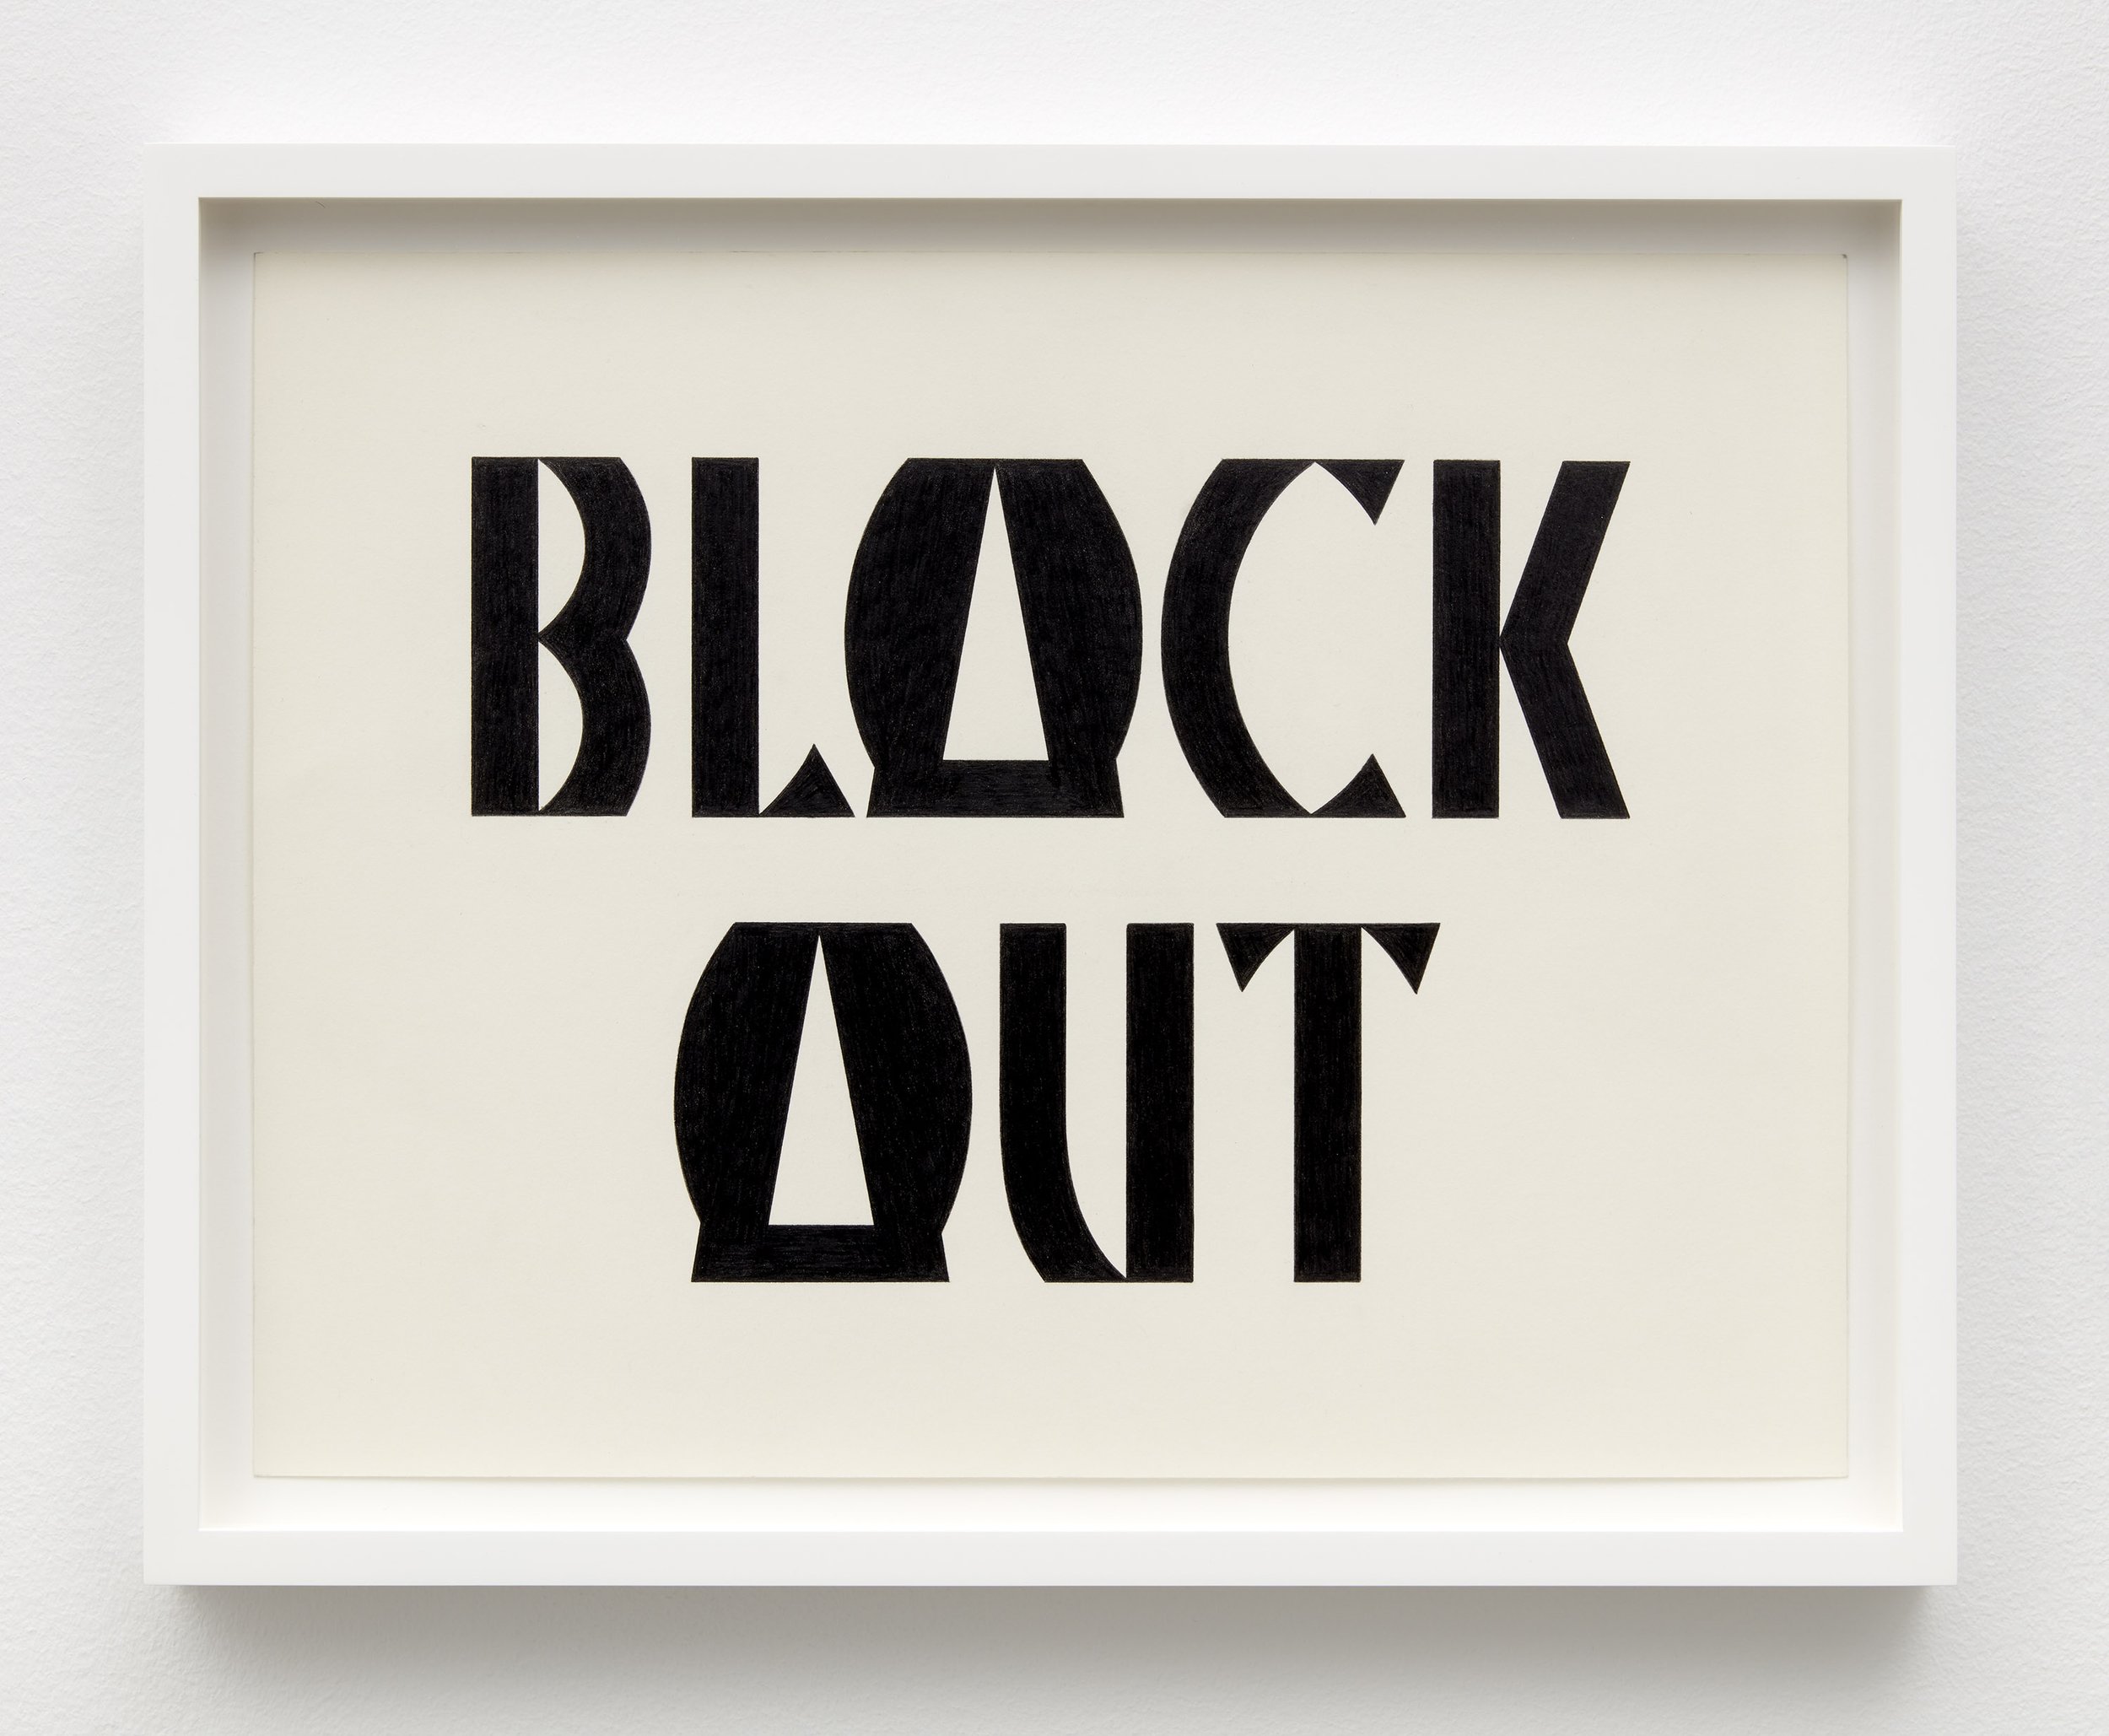 BLOCKED OUT, BLACKED OUT, 2010